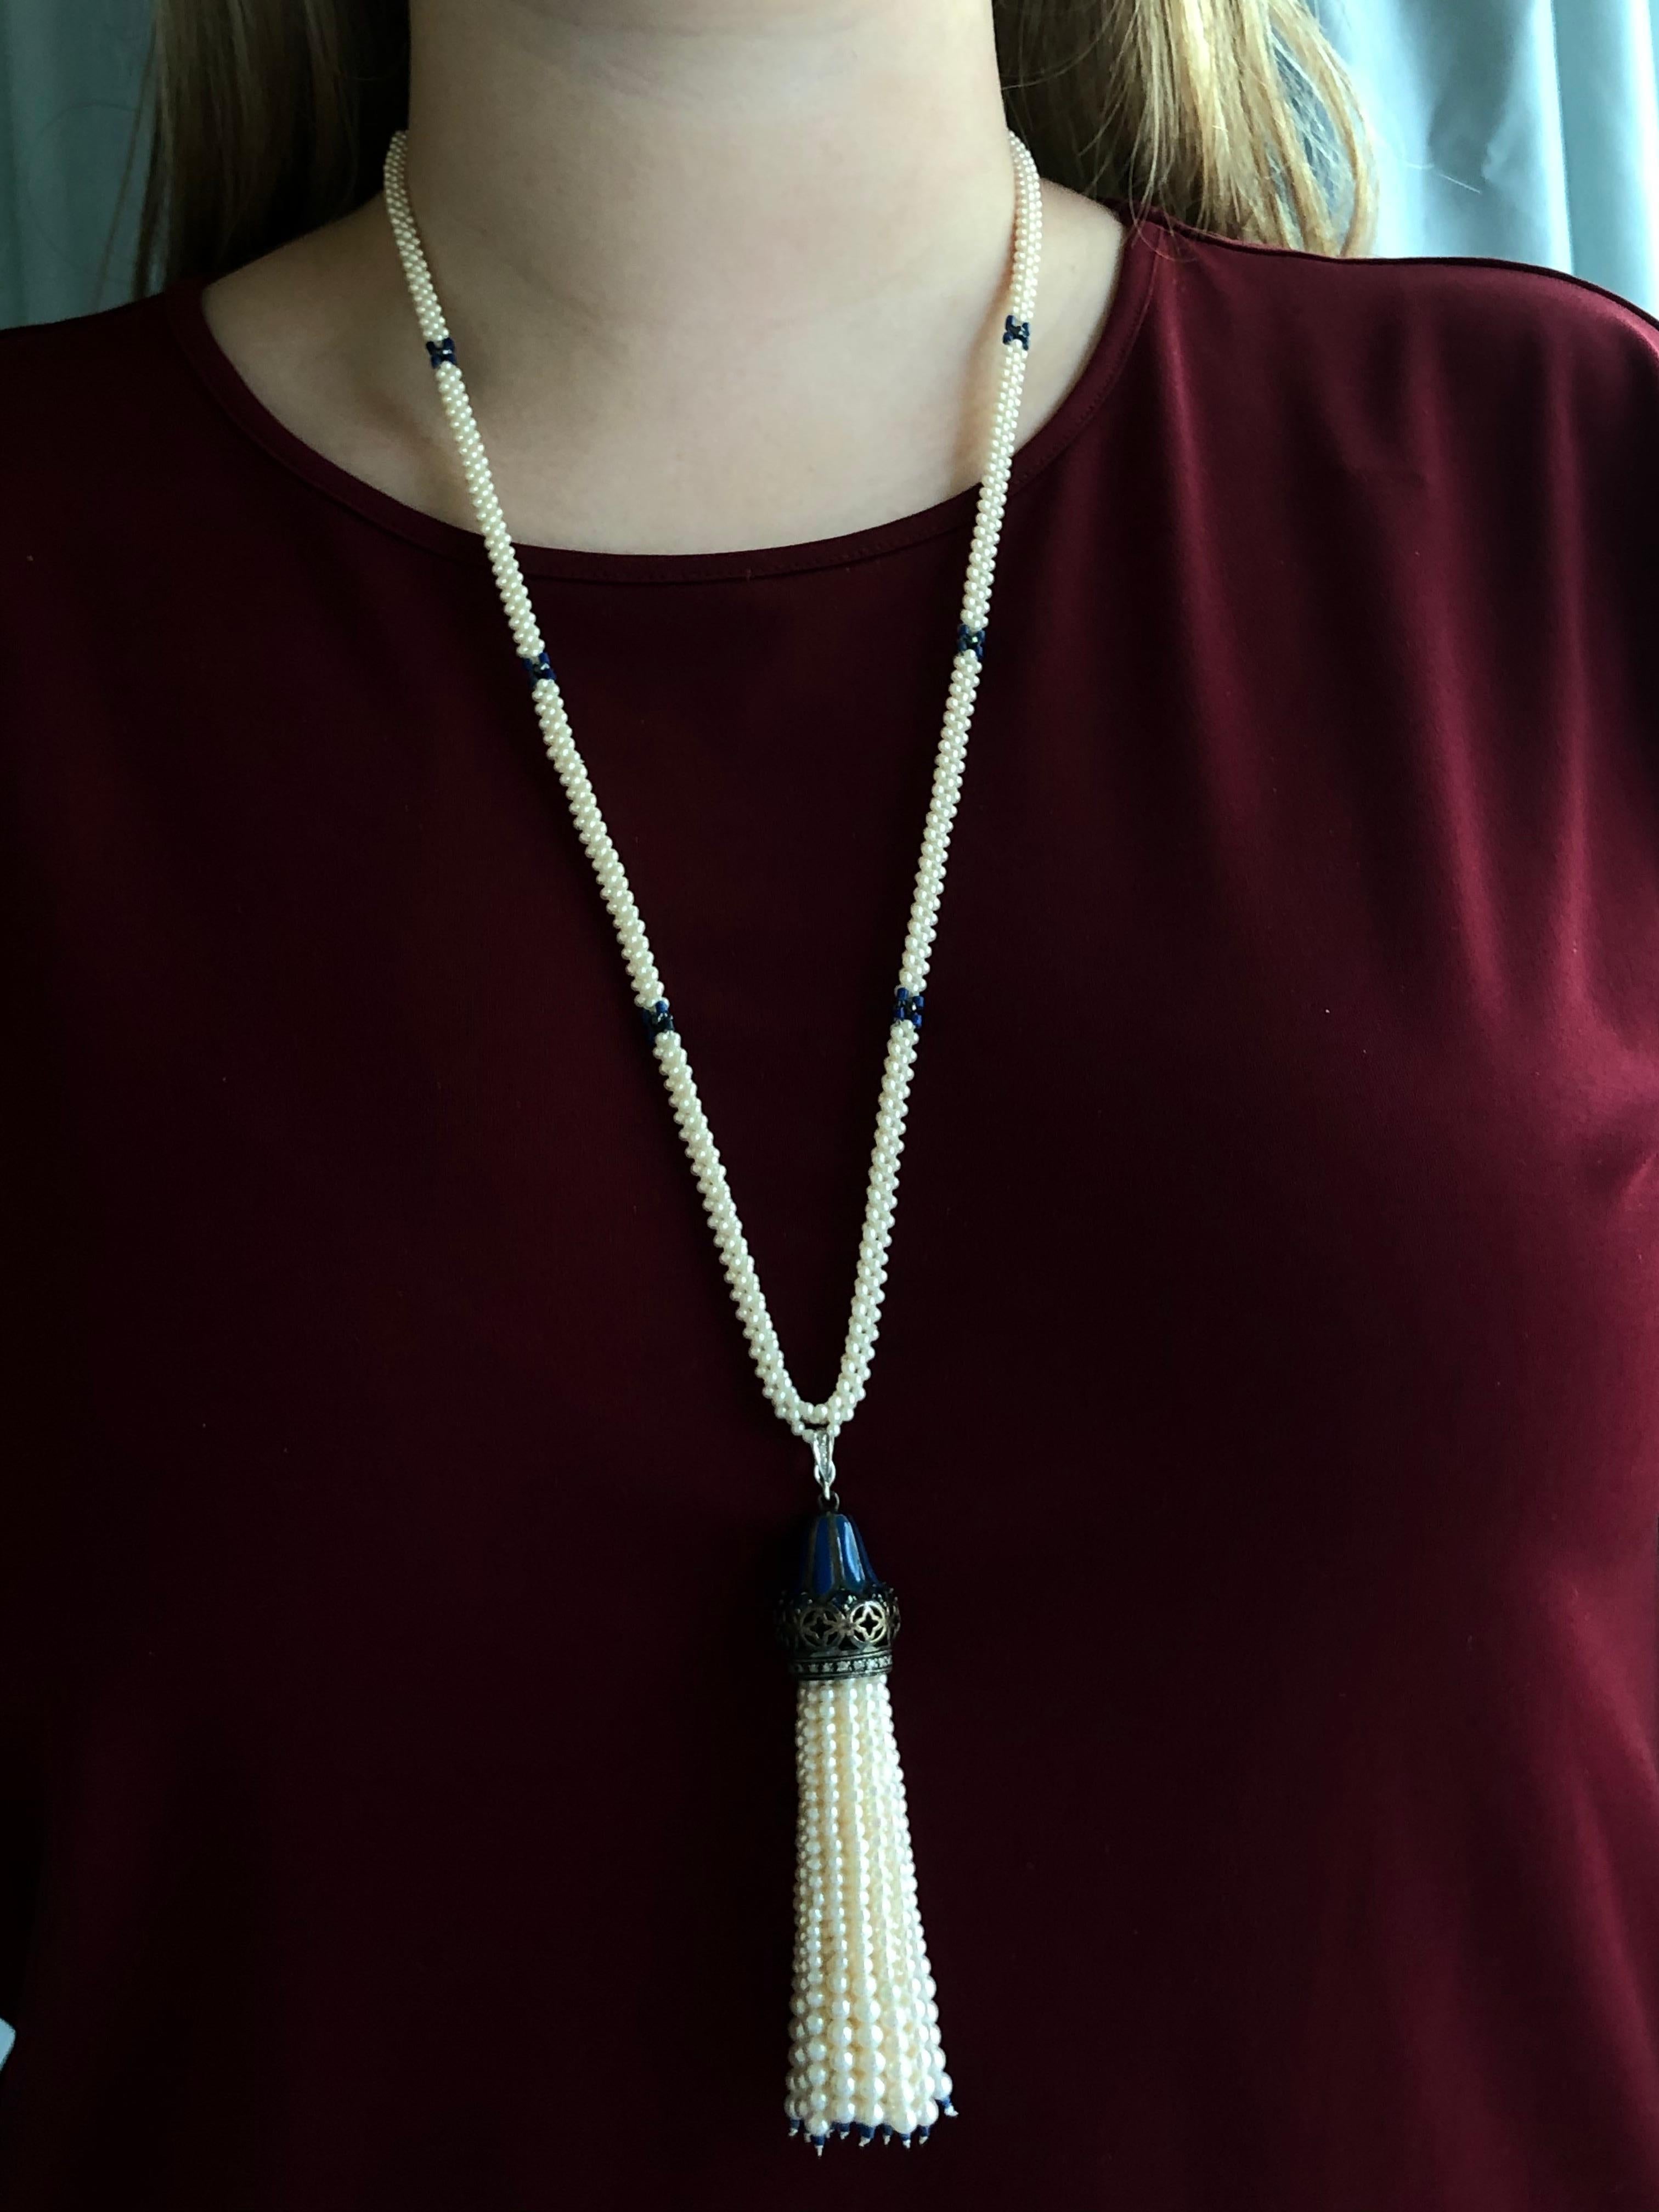 Marina J  Woven Long Pearl Necklace with Hand made Graduated Tassle with Enamel  2